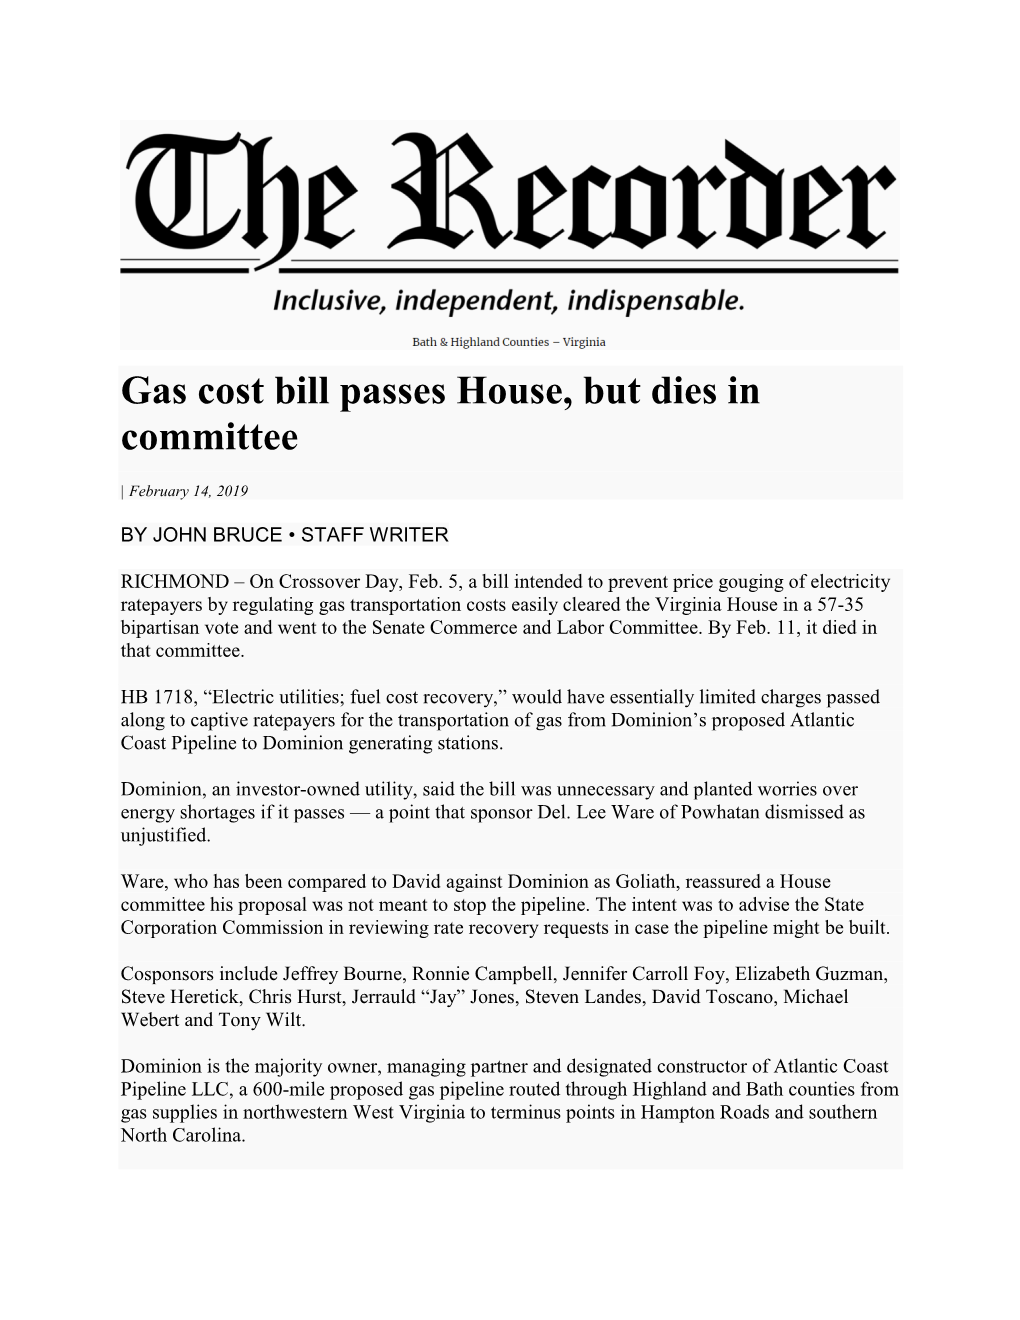 Gas Cost Bill Passes House, but Dies in Committee